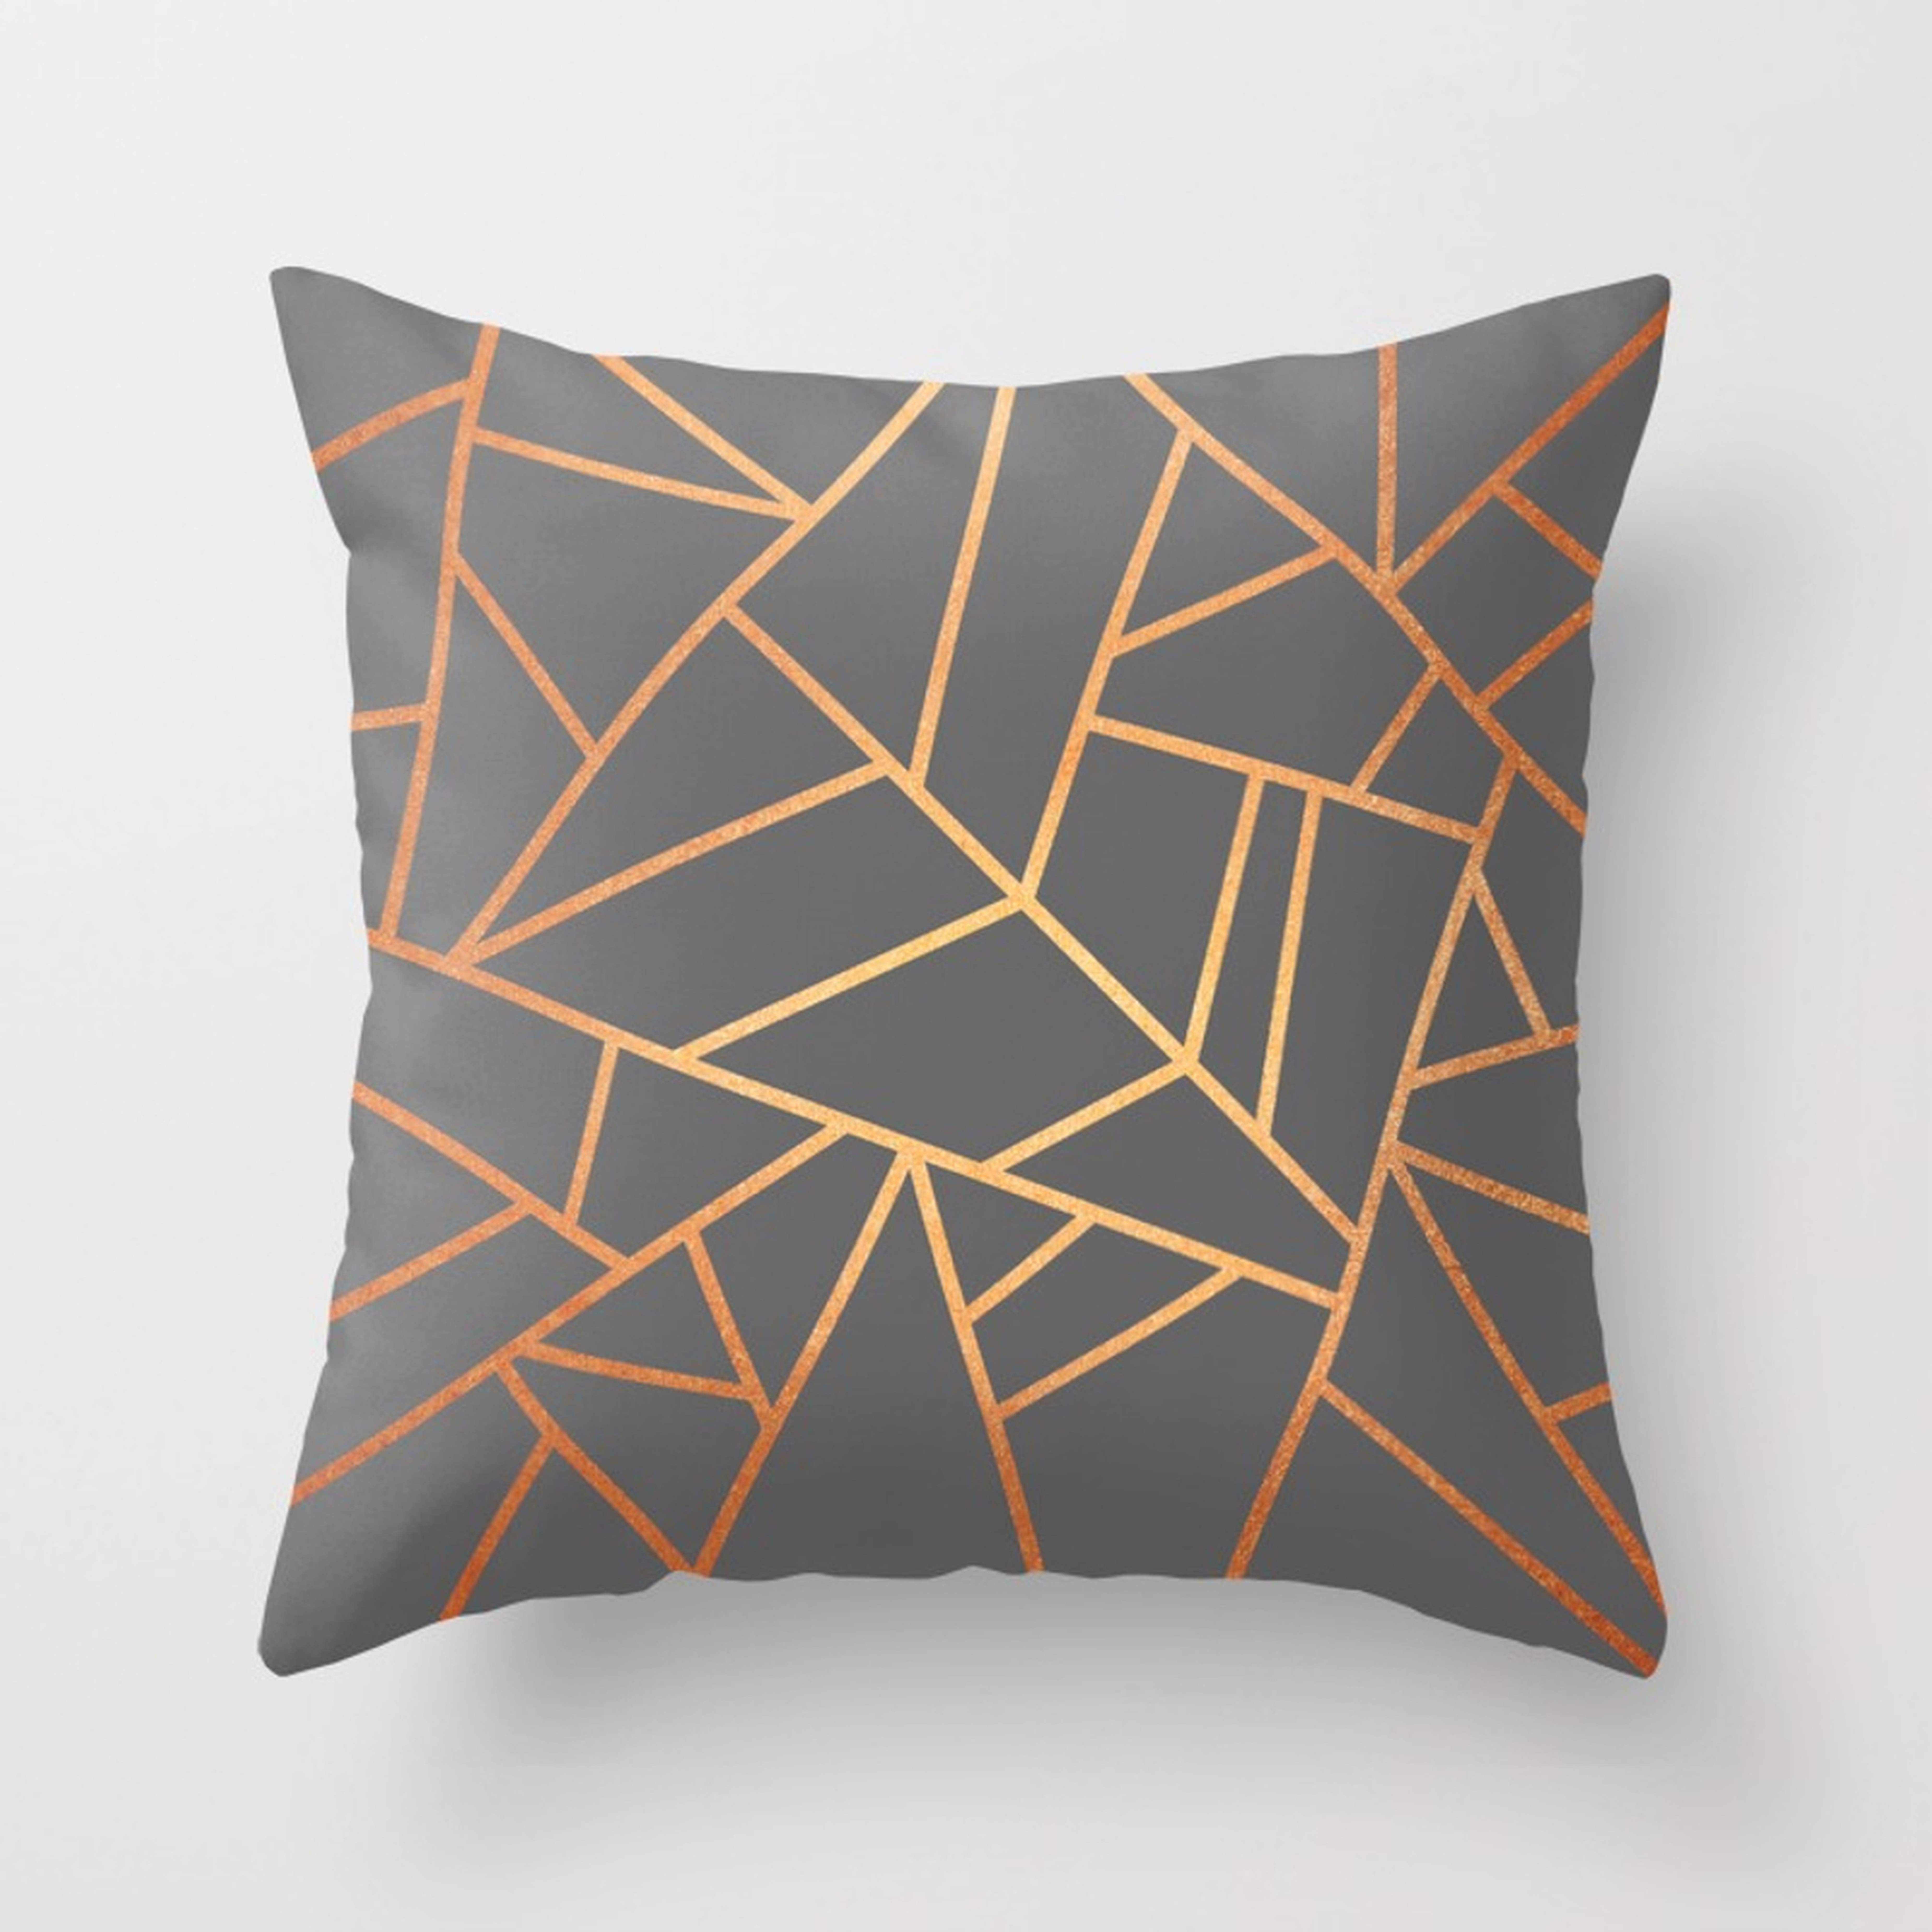 Copper And Grey Throw Pillow by Elisabeth Fredriksson - Cover (20" x 20") With Pillow Insert - Indoor Pillow - Society6